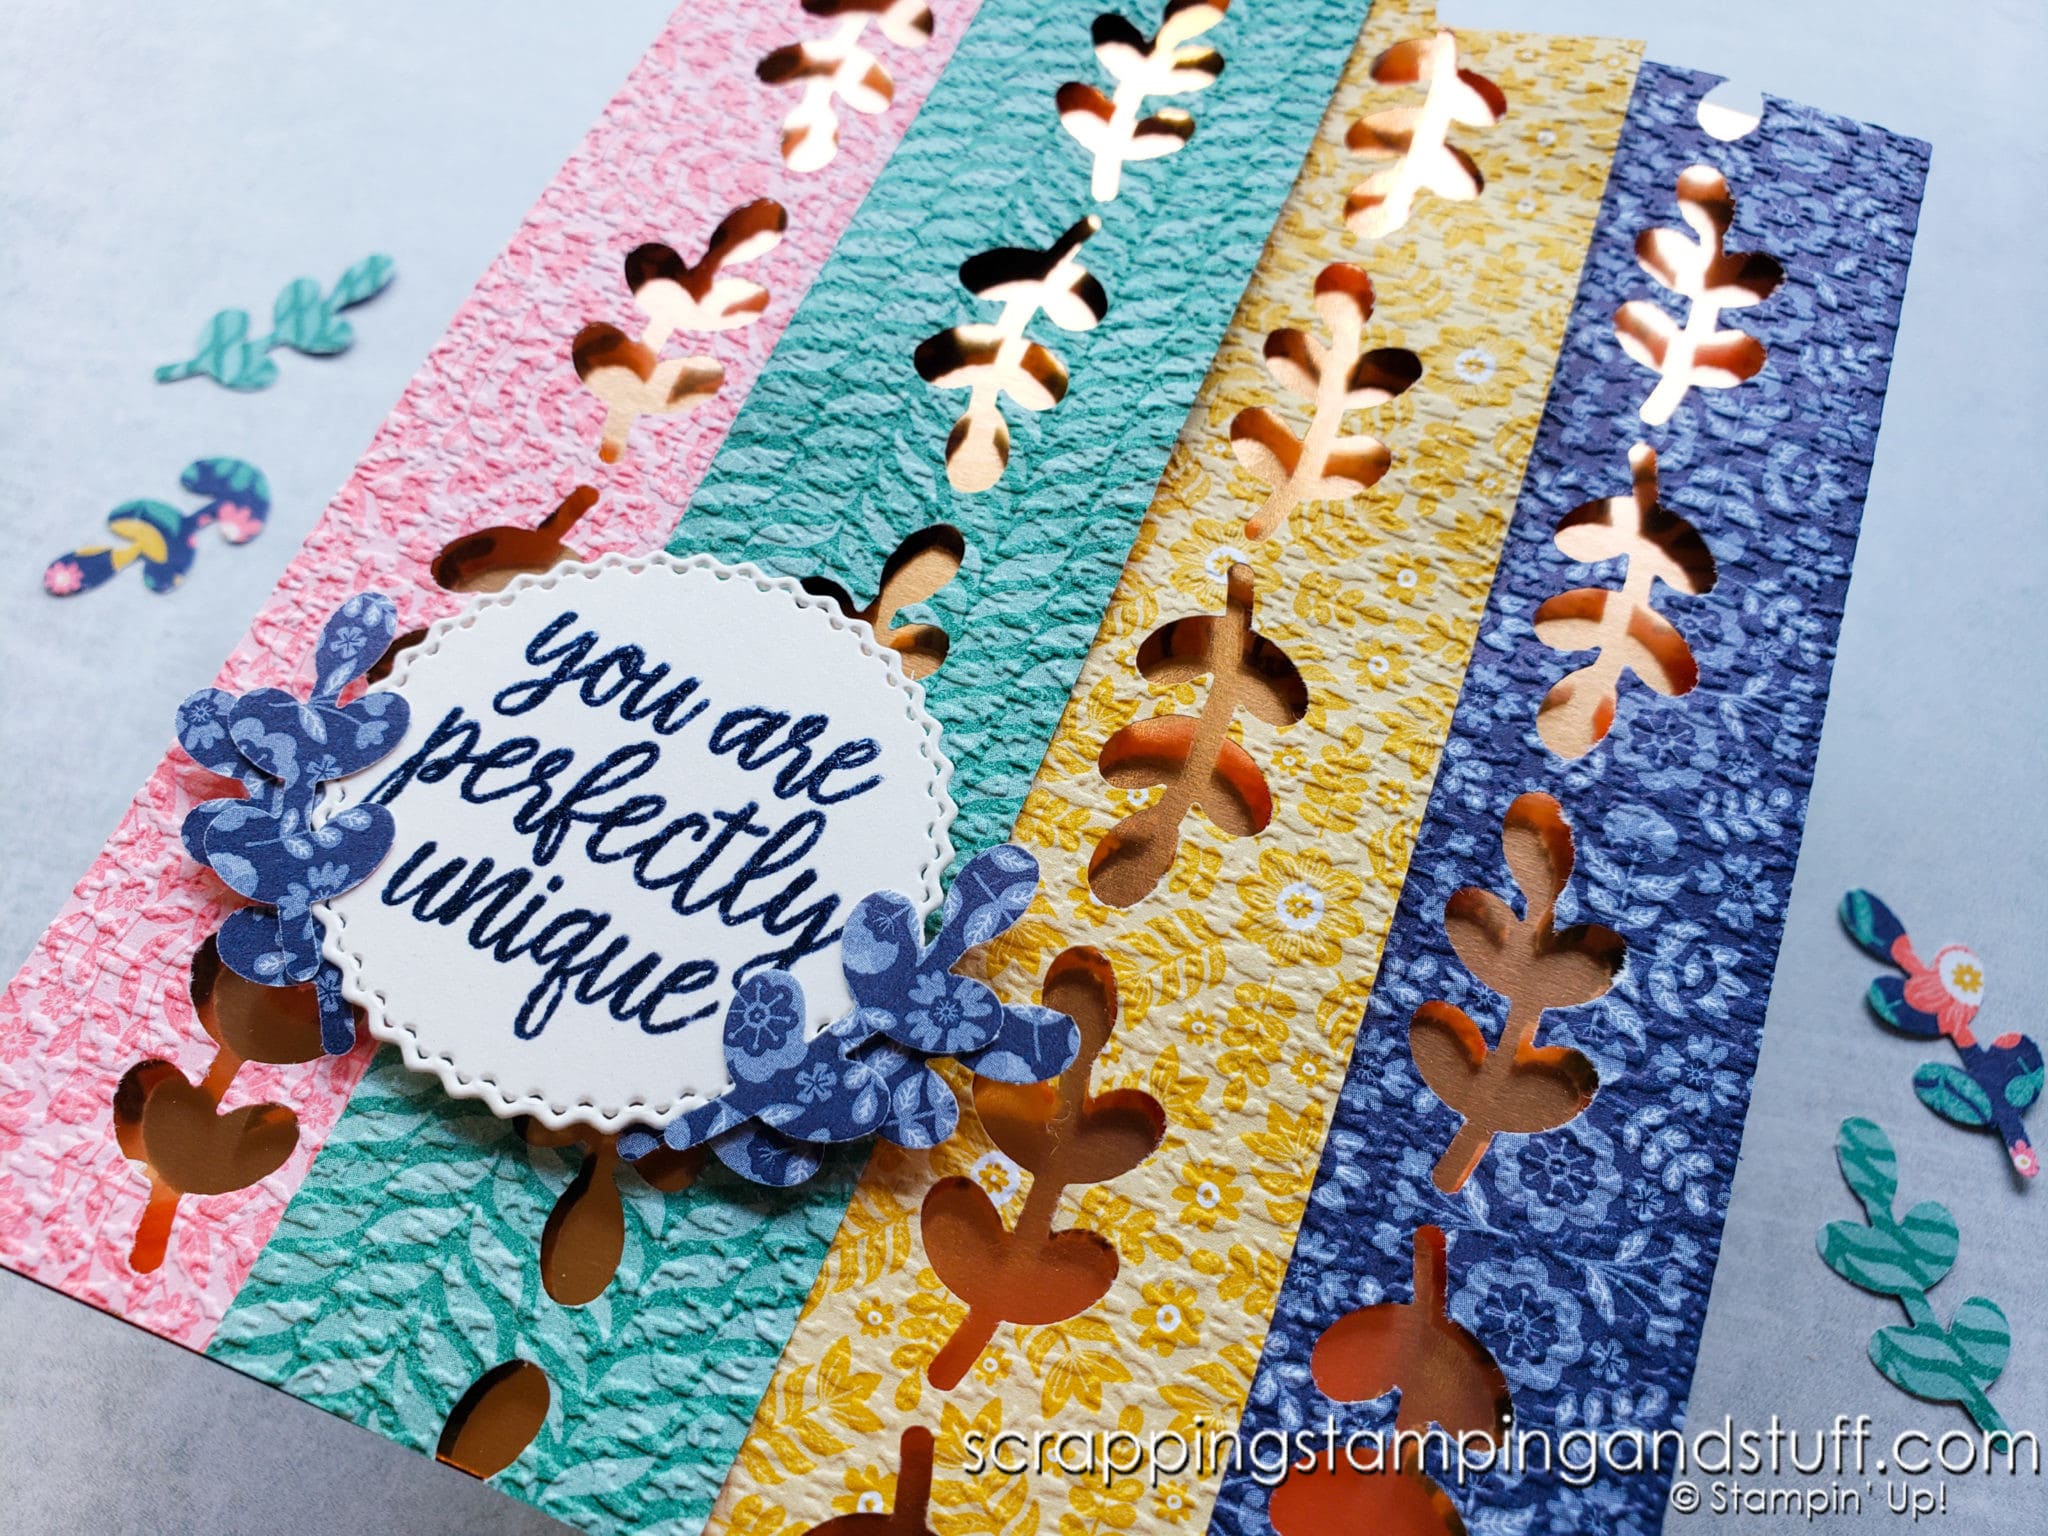 Stampin Up Symmetrical Stems Border Punch & A Fun Way To Use Border Punches